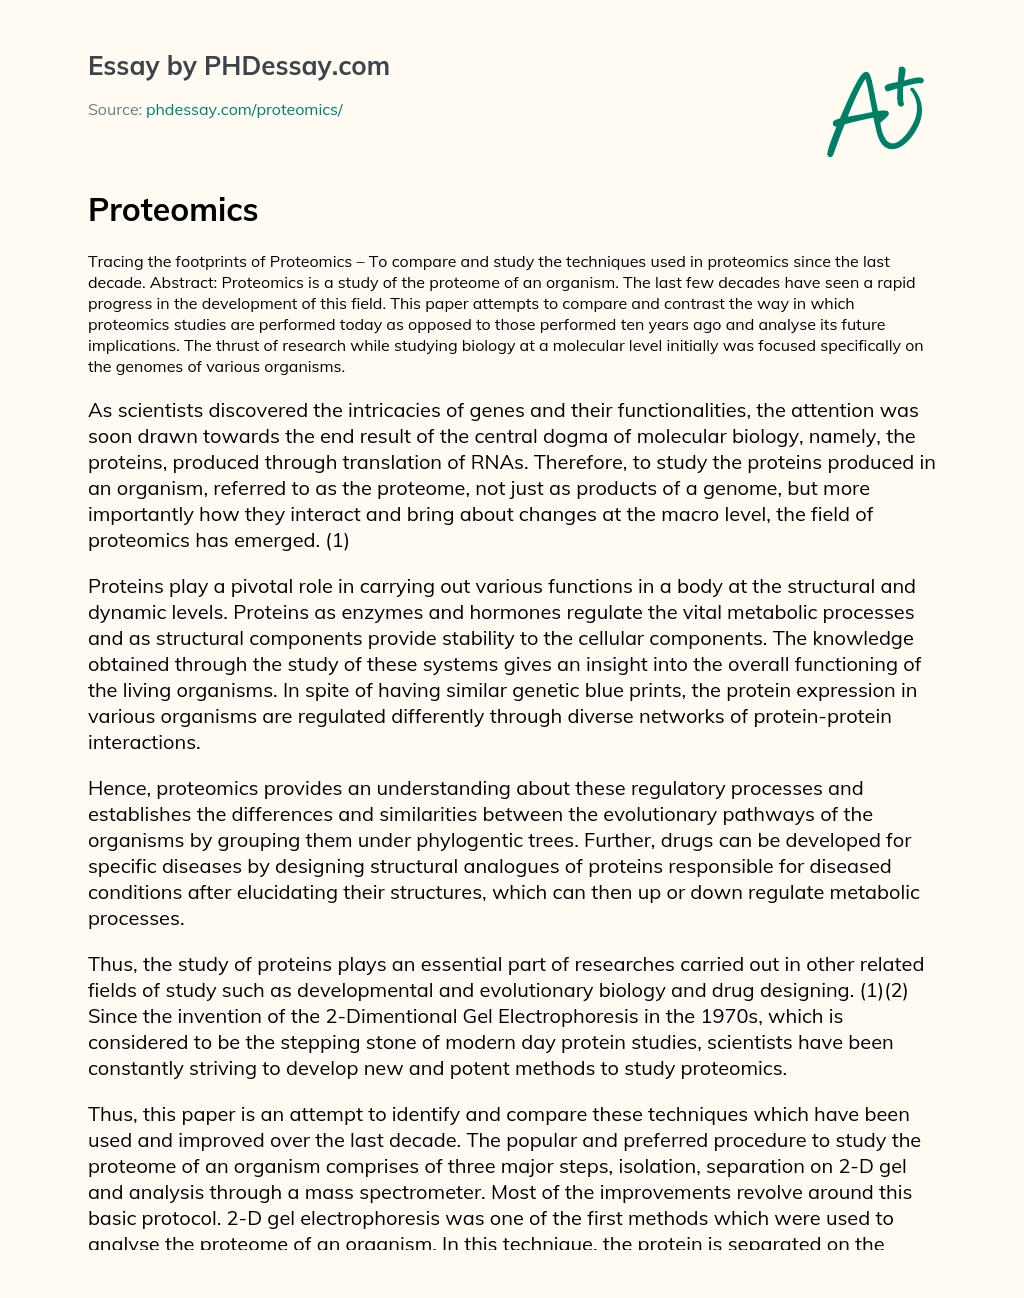 Proteomics: Past, Present, and Future Implications for Studying the Proteome of an Organism essay